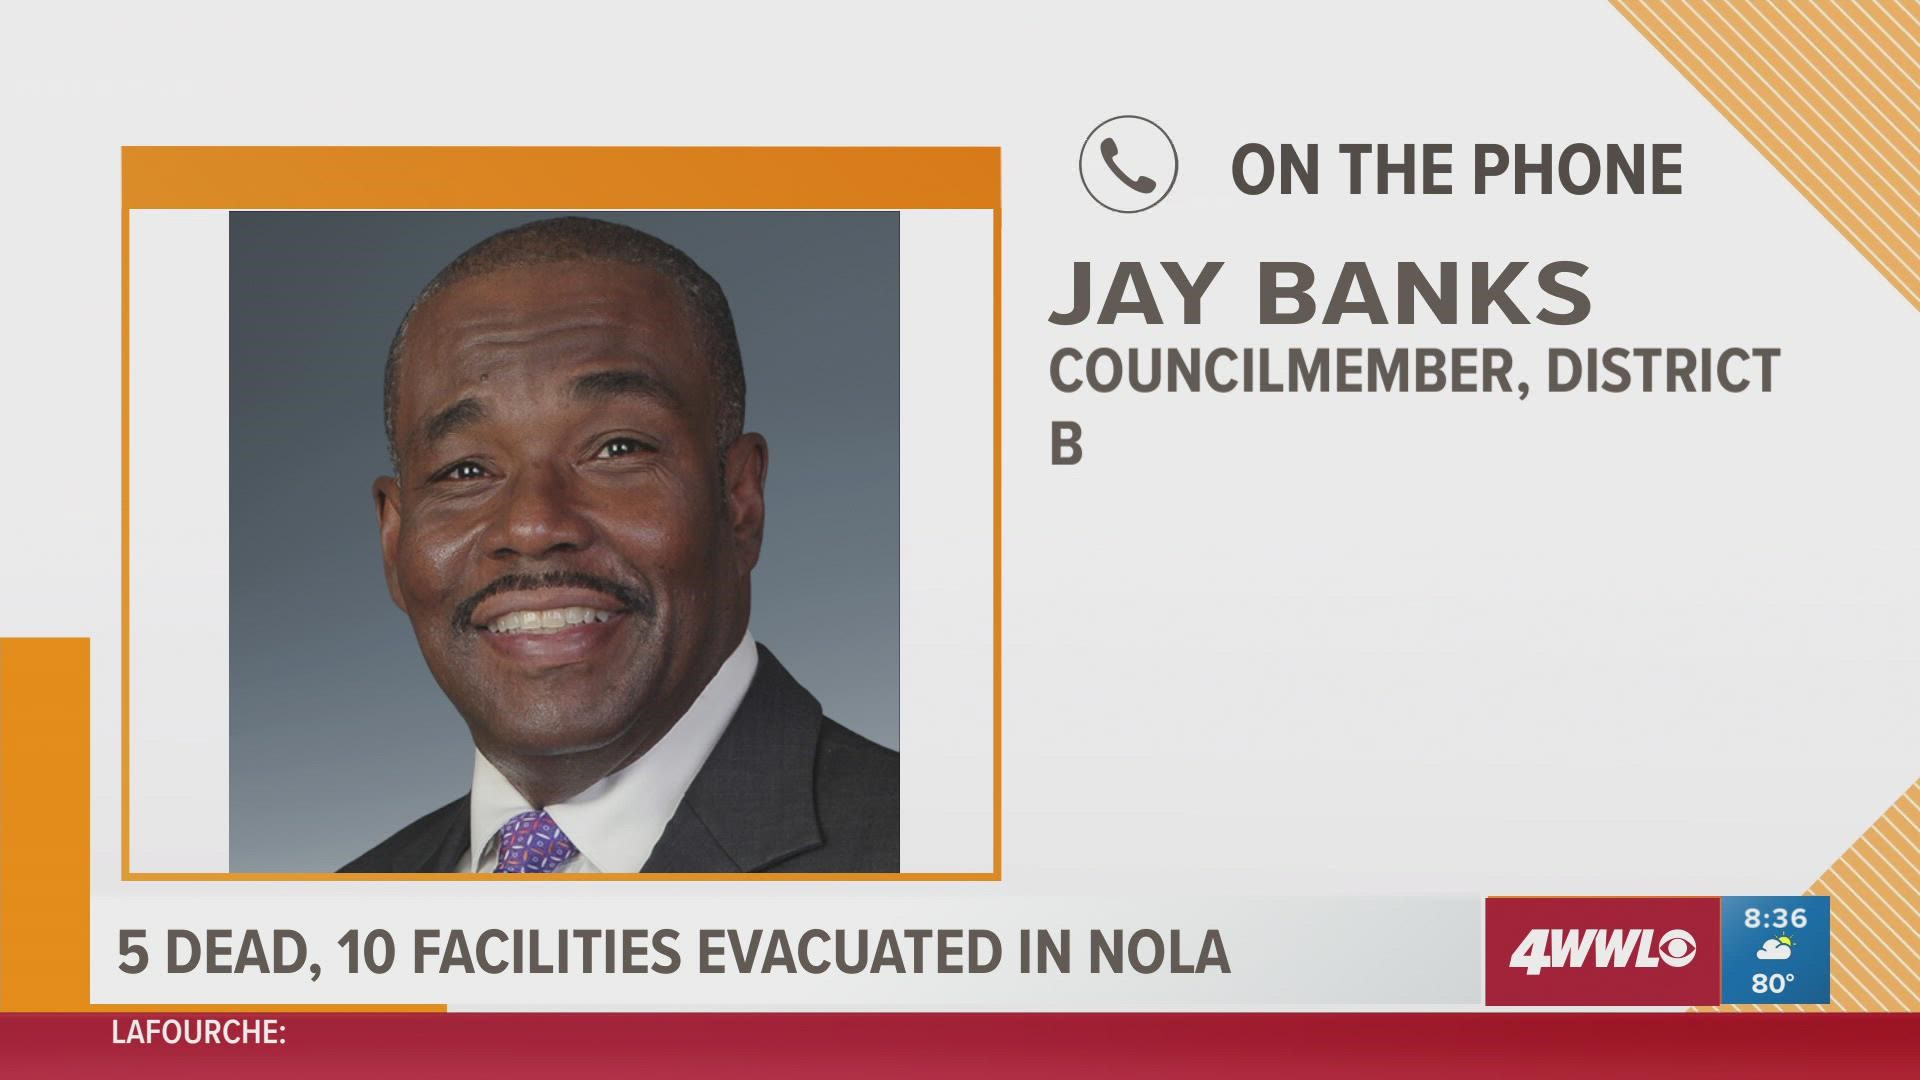 Councilmember Jay Banks discusses the "unbelievable" situation where five people were found dead in nursing homes.